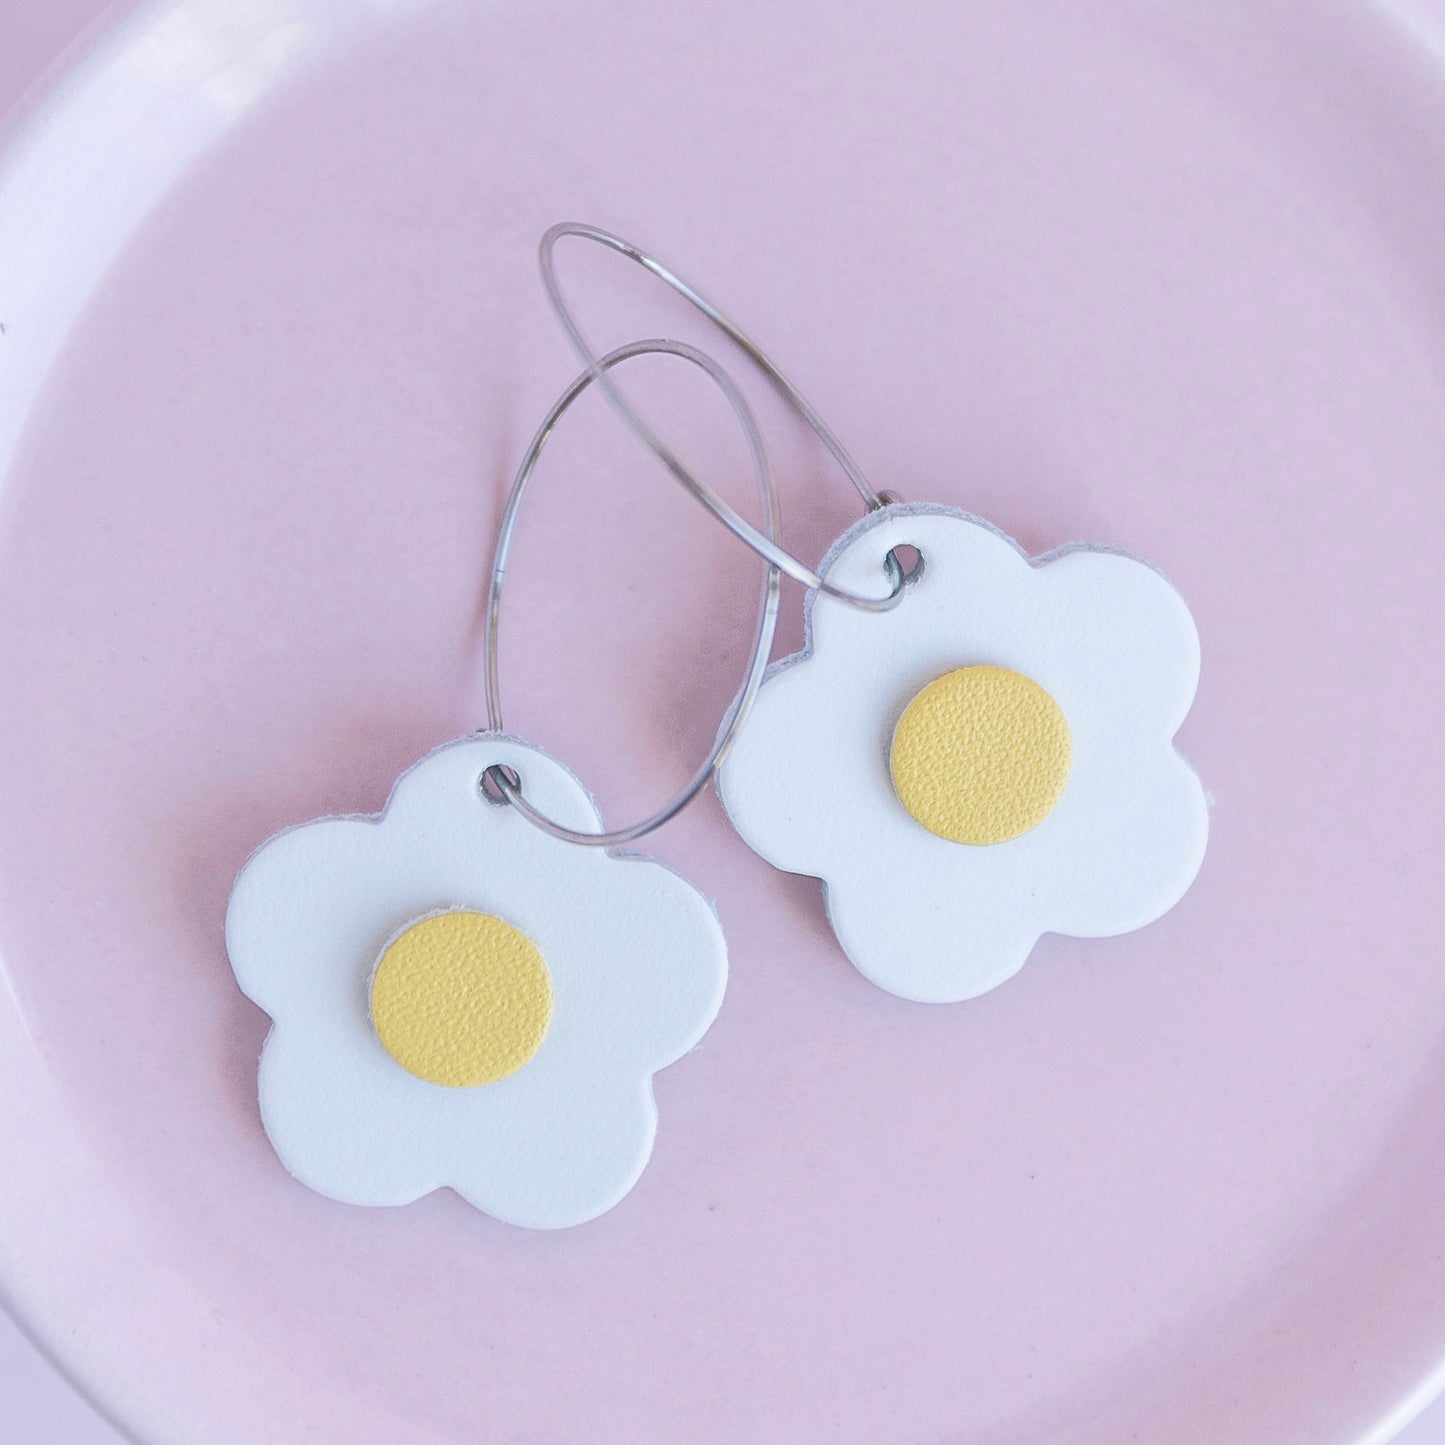 THE LEATHER DAISY HOOP in White/ Lightweight Statement Earrings